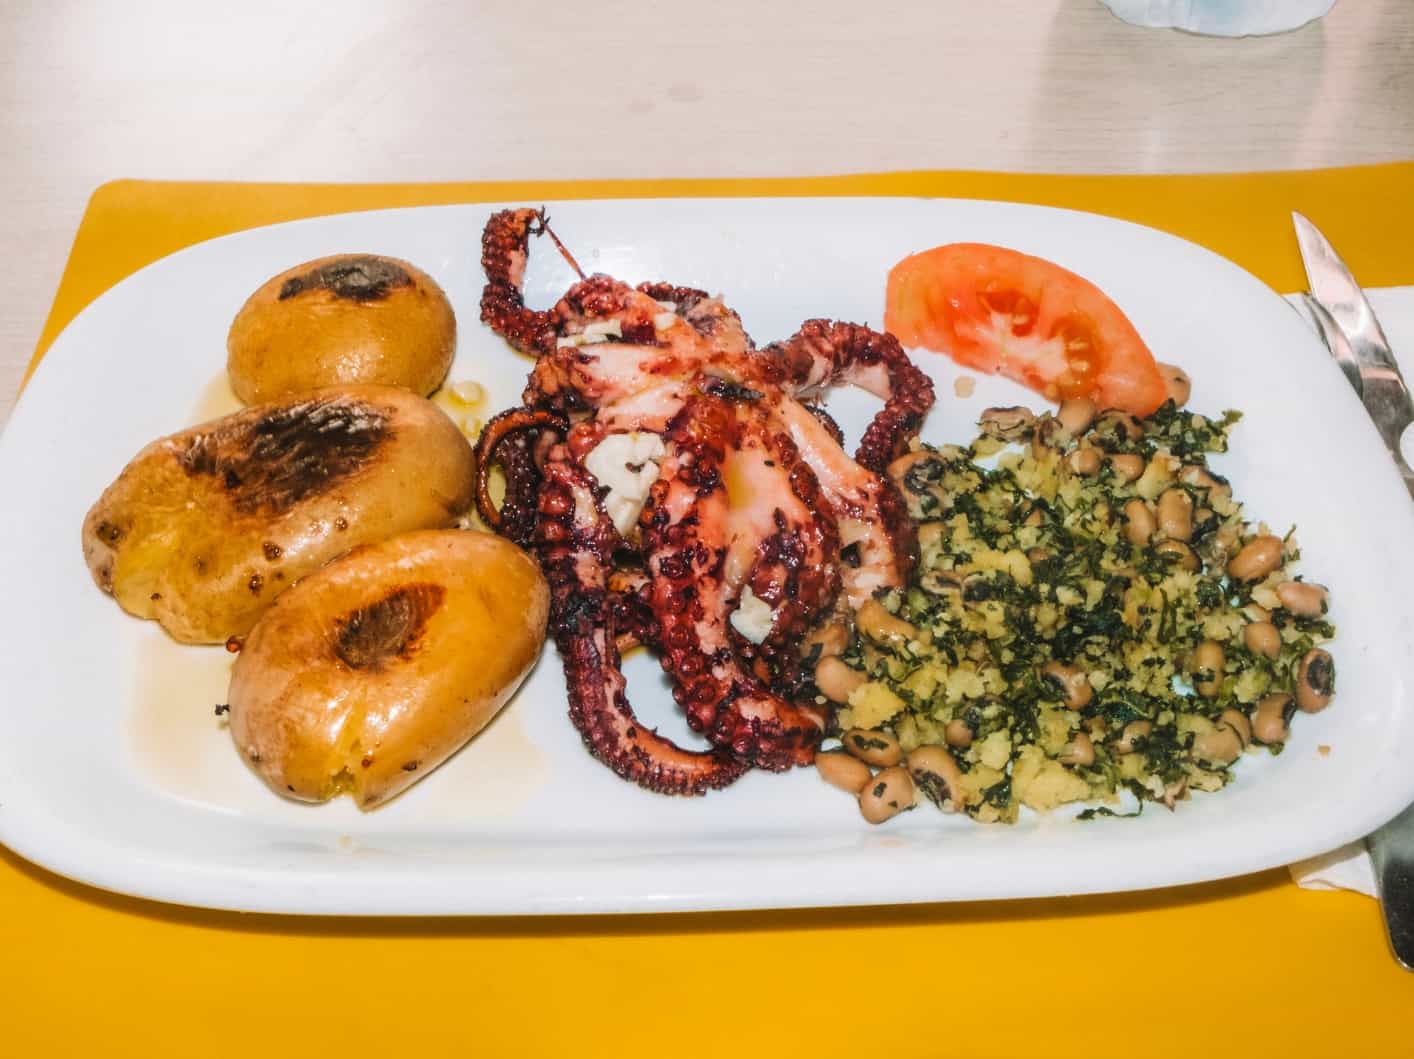 My favorite meal to try with 5 days in Lisbon – grilled octopus and potatoes from Santo Andre in Alfama. 